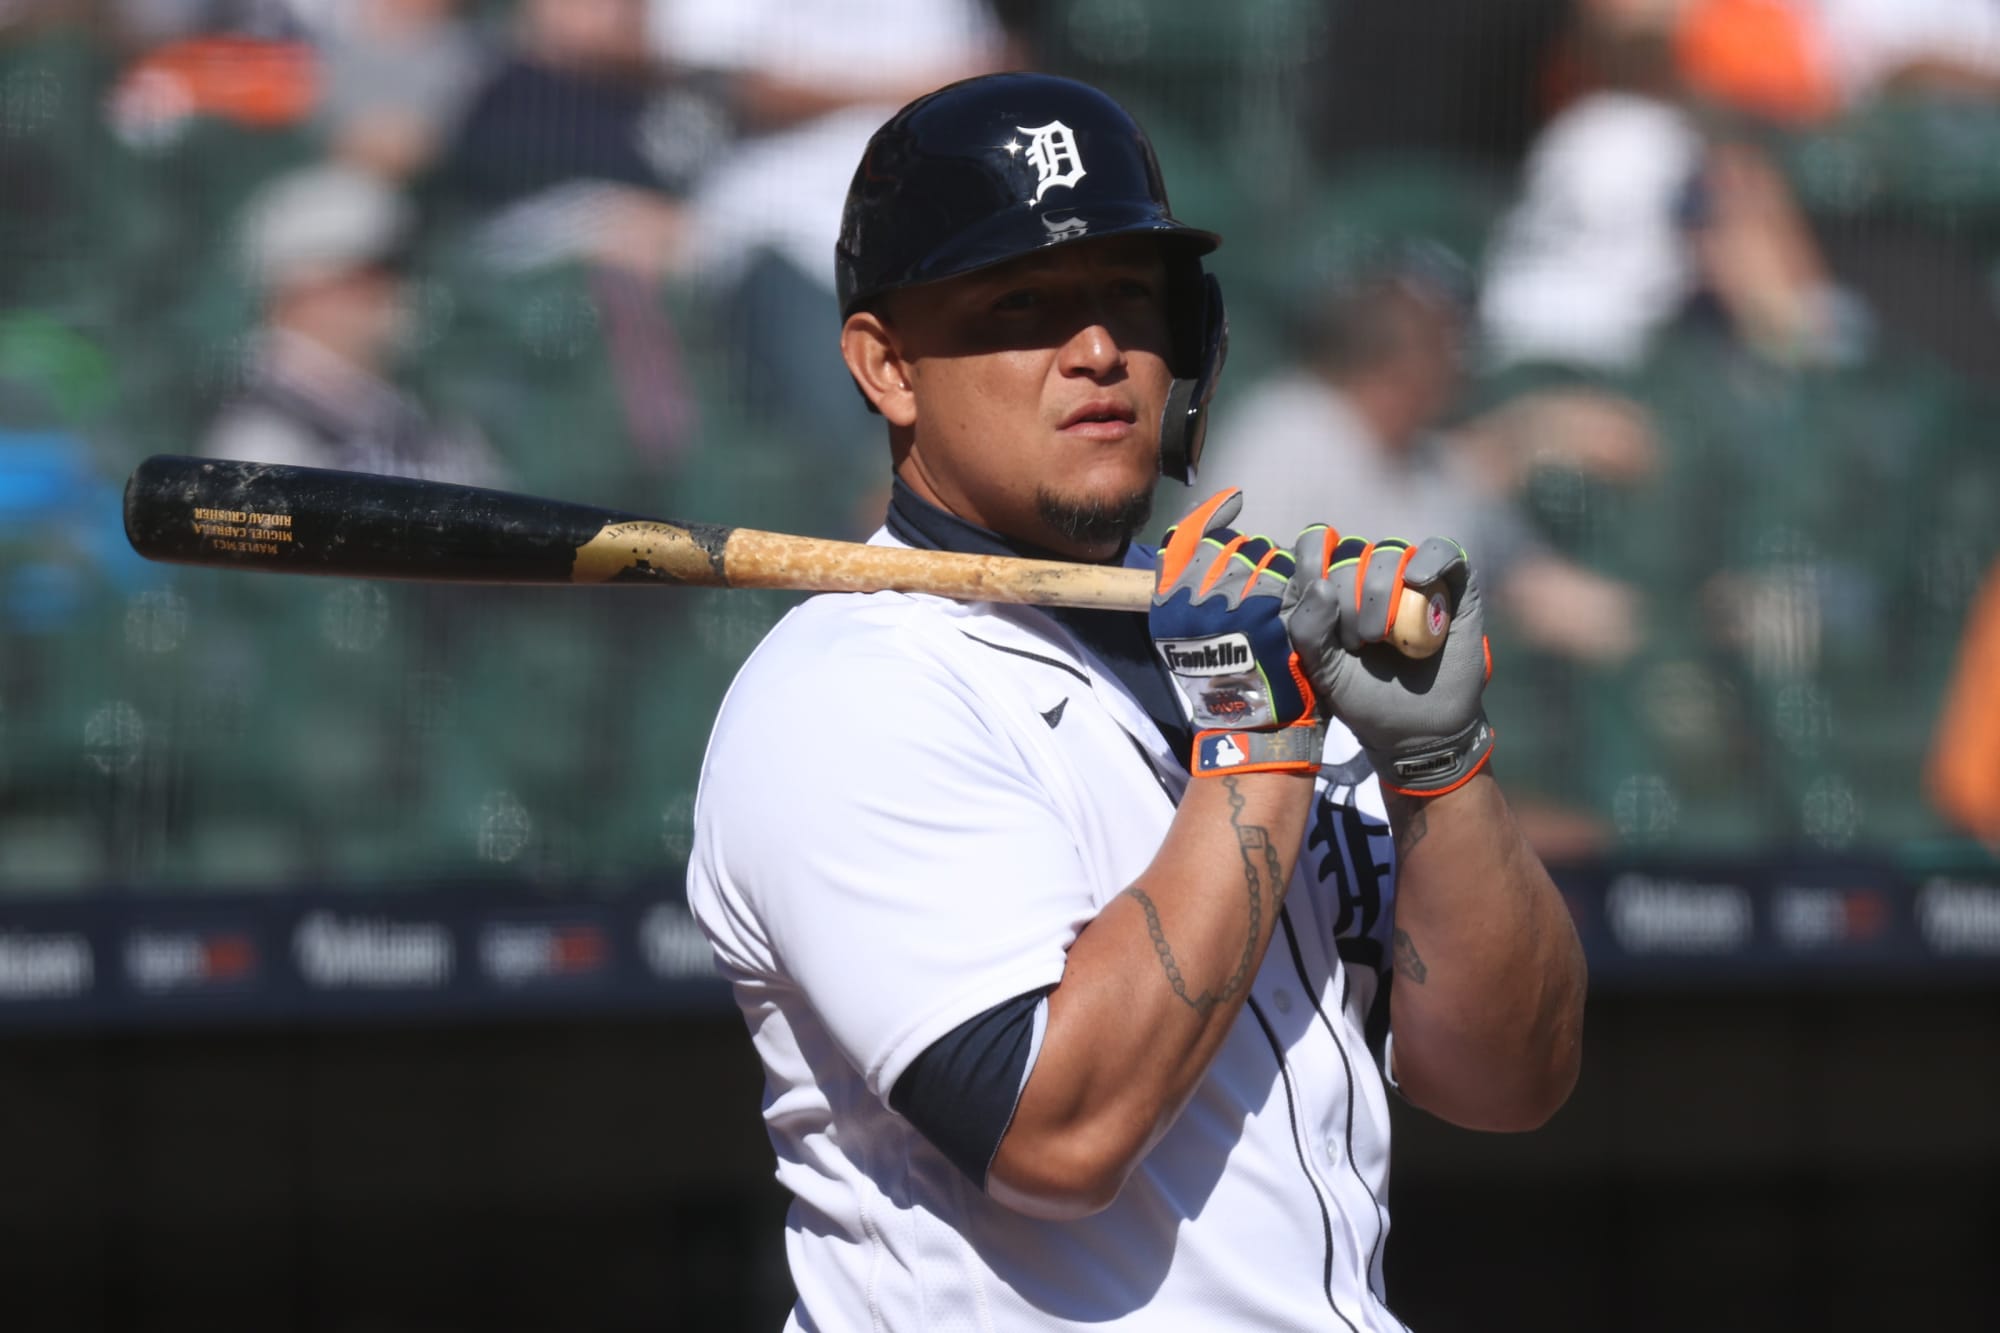 MVP for Miggy: Miguel Cabrera is American League Most Valuable